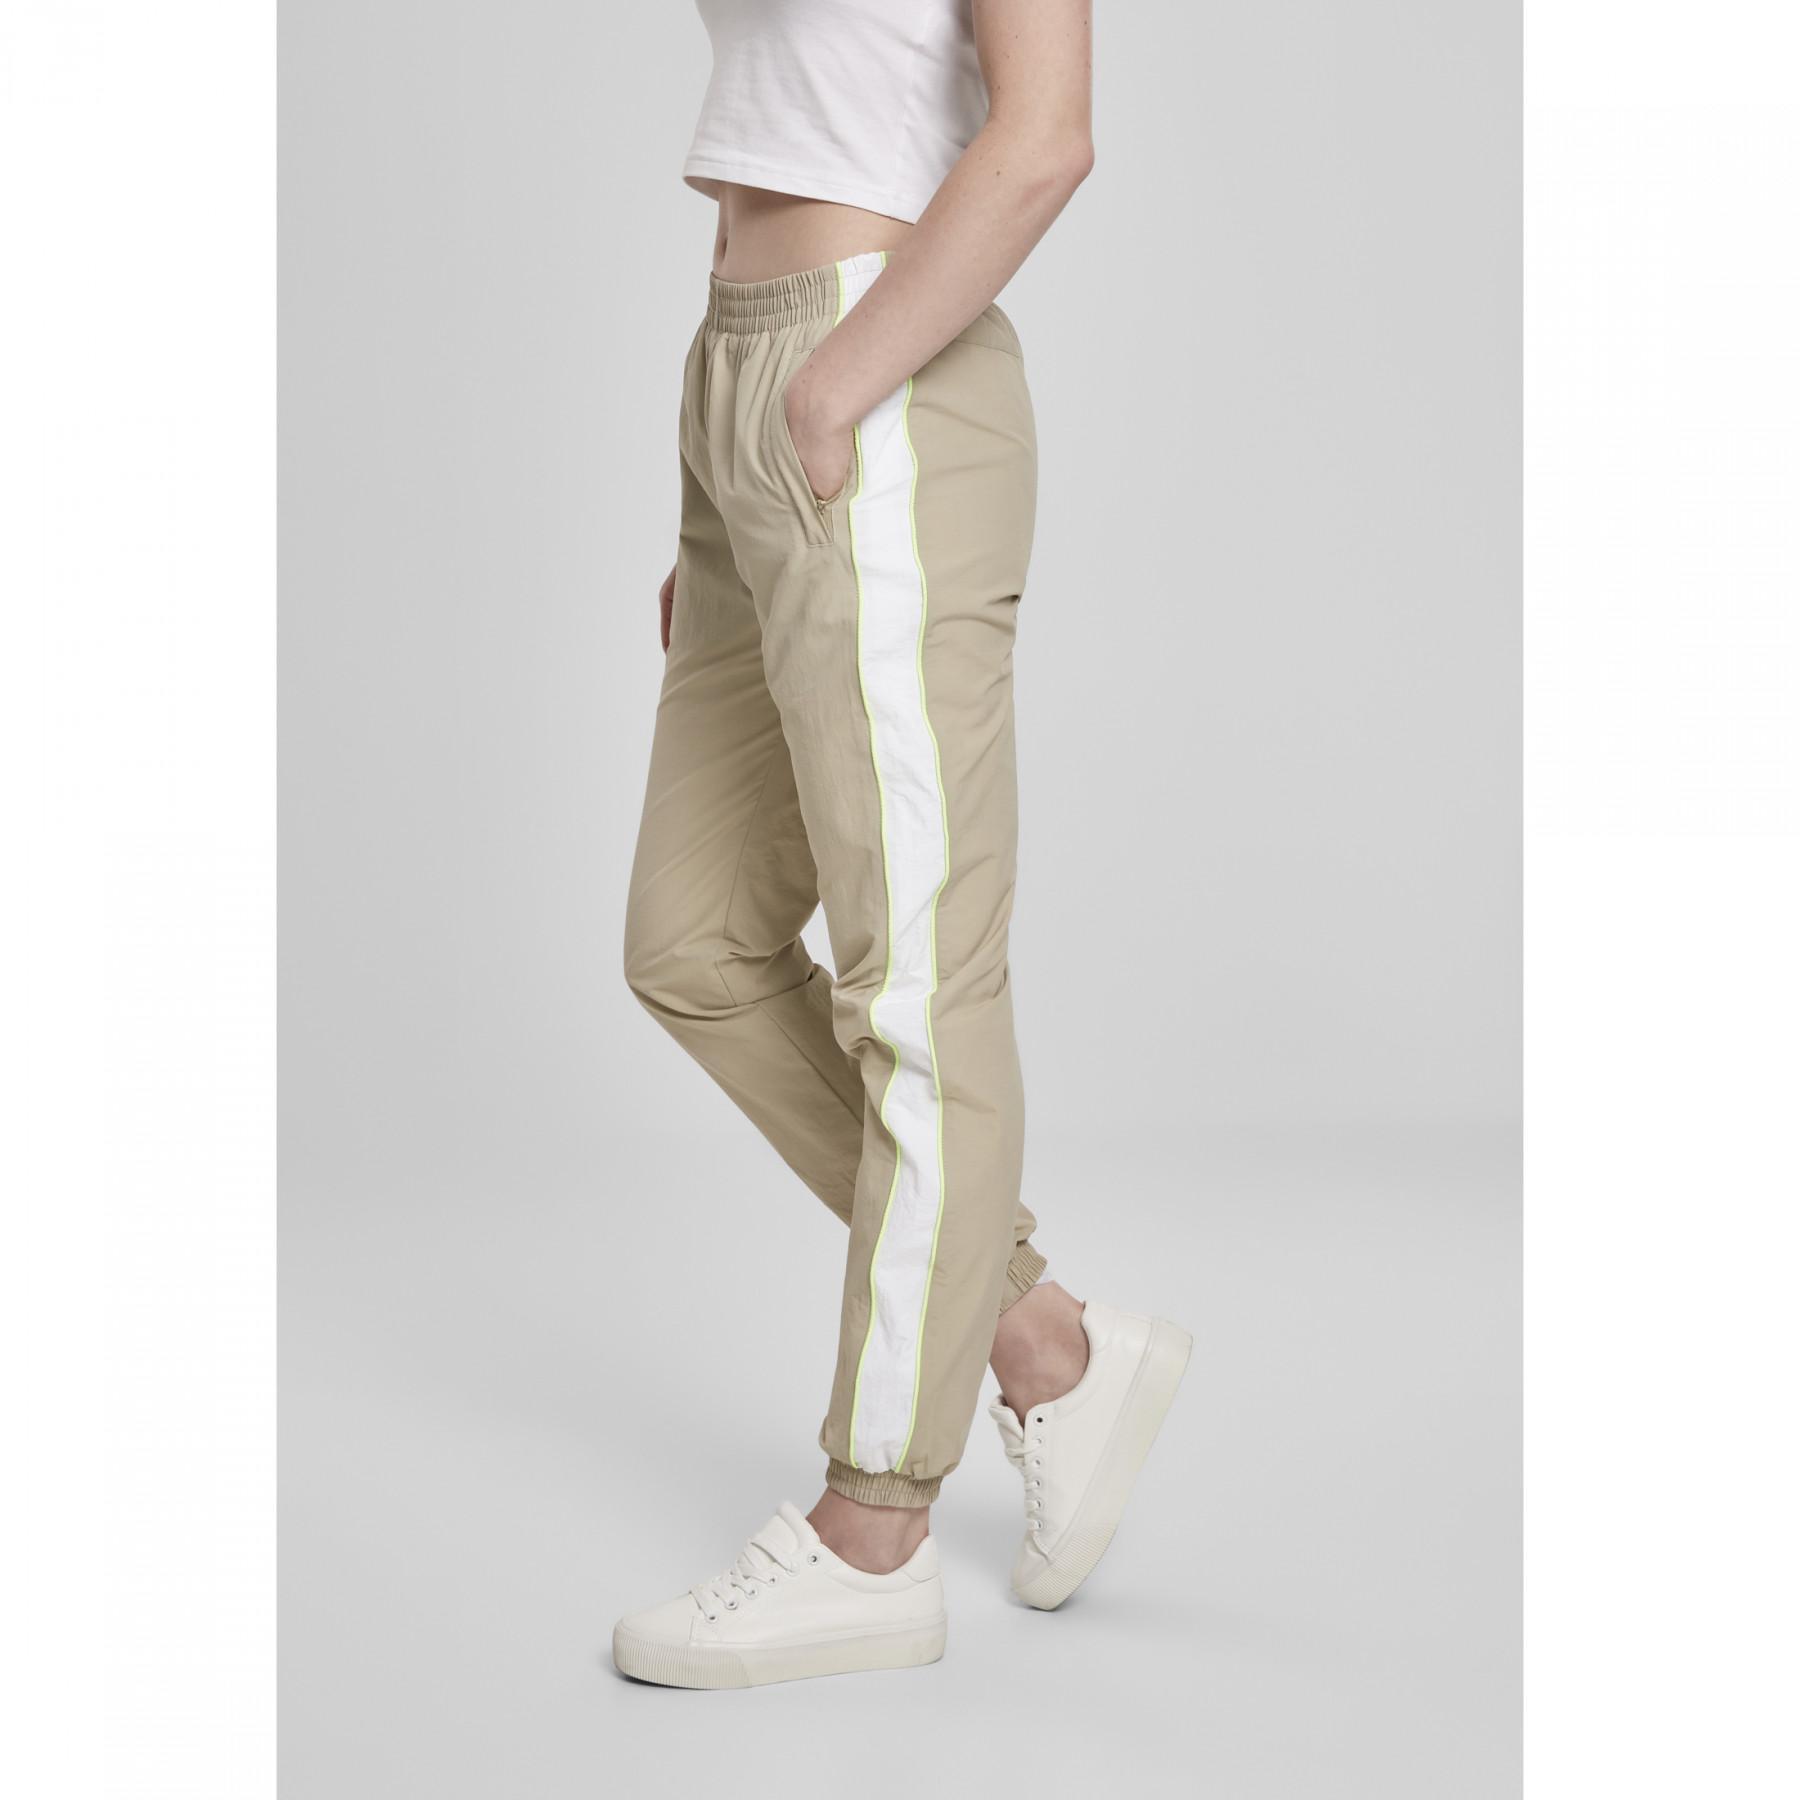 Trousers woman Urban Classic piped